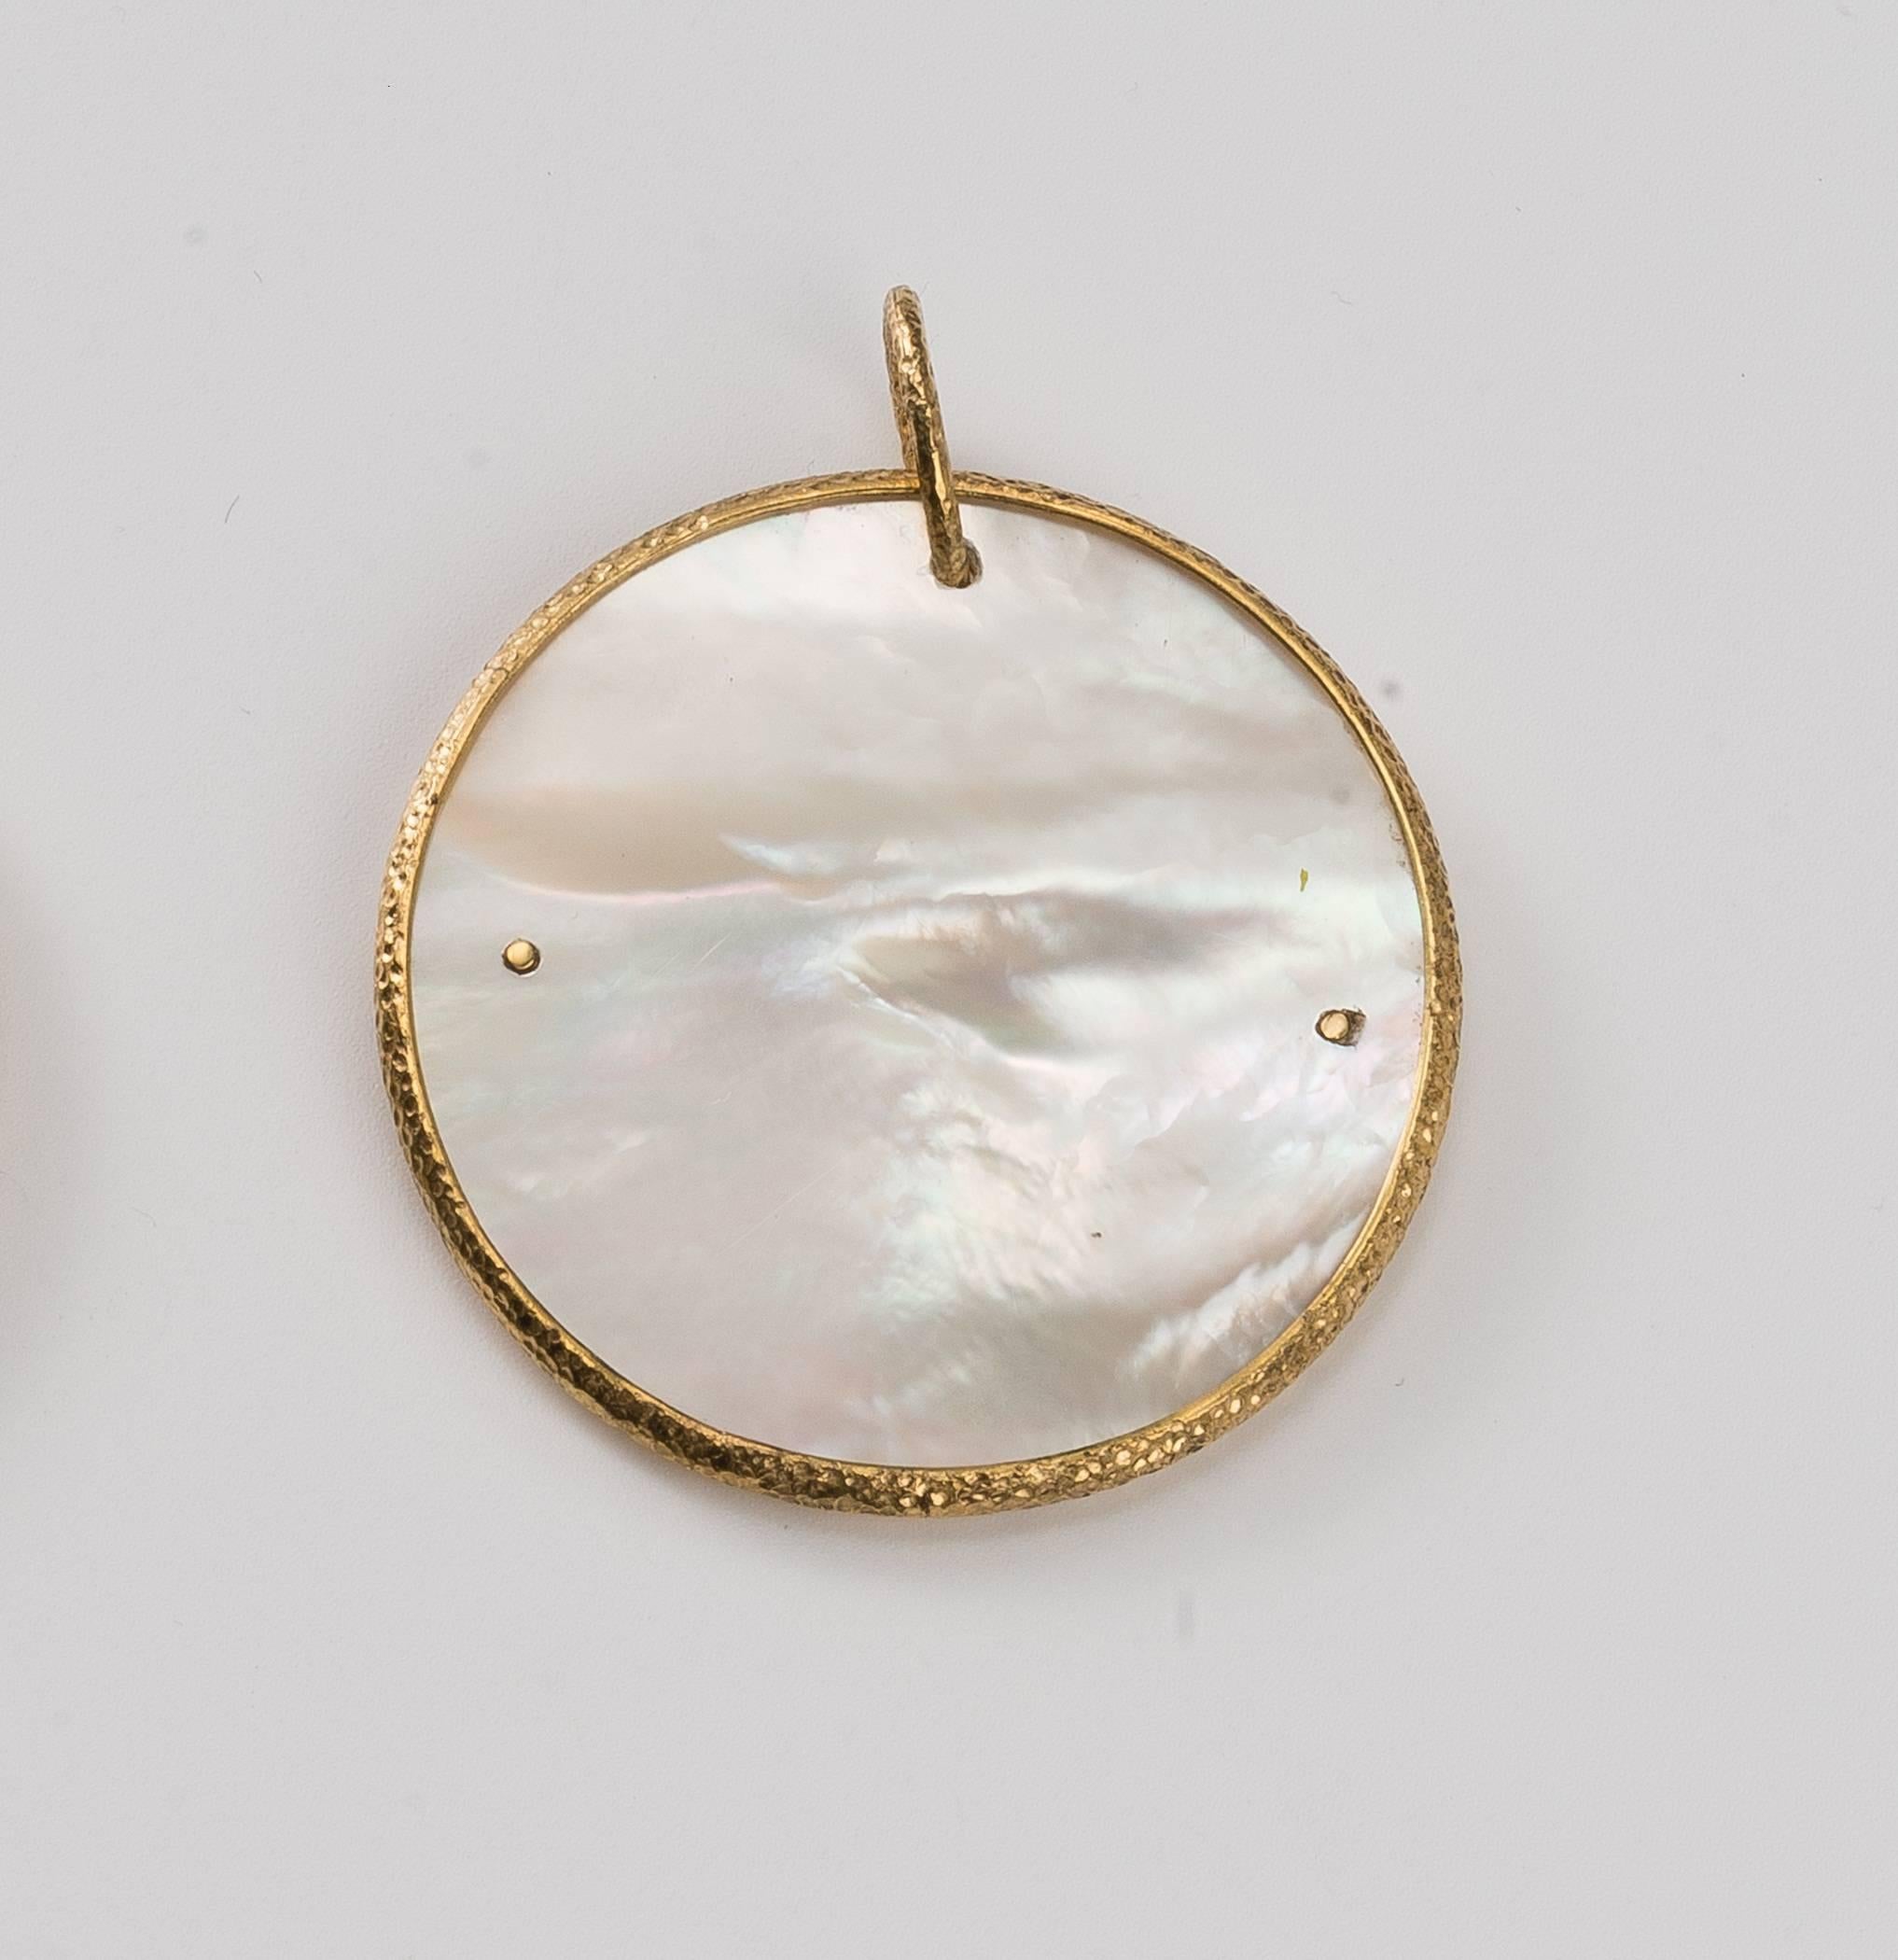 From our Heritage Collection of Chinoiserie designs, the luminous mother-of-pearl pendant is wrapped in hammered gold with ruyi clouds, 1 3/8 in (3.5cm) dia. The ruyi cloud is an auspicious symbol of wisdom and heavenly blessings. 
